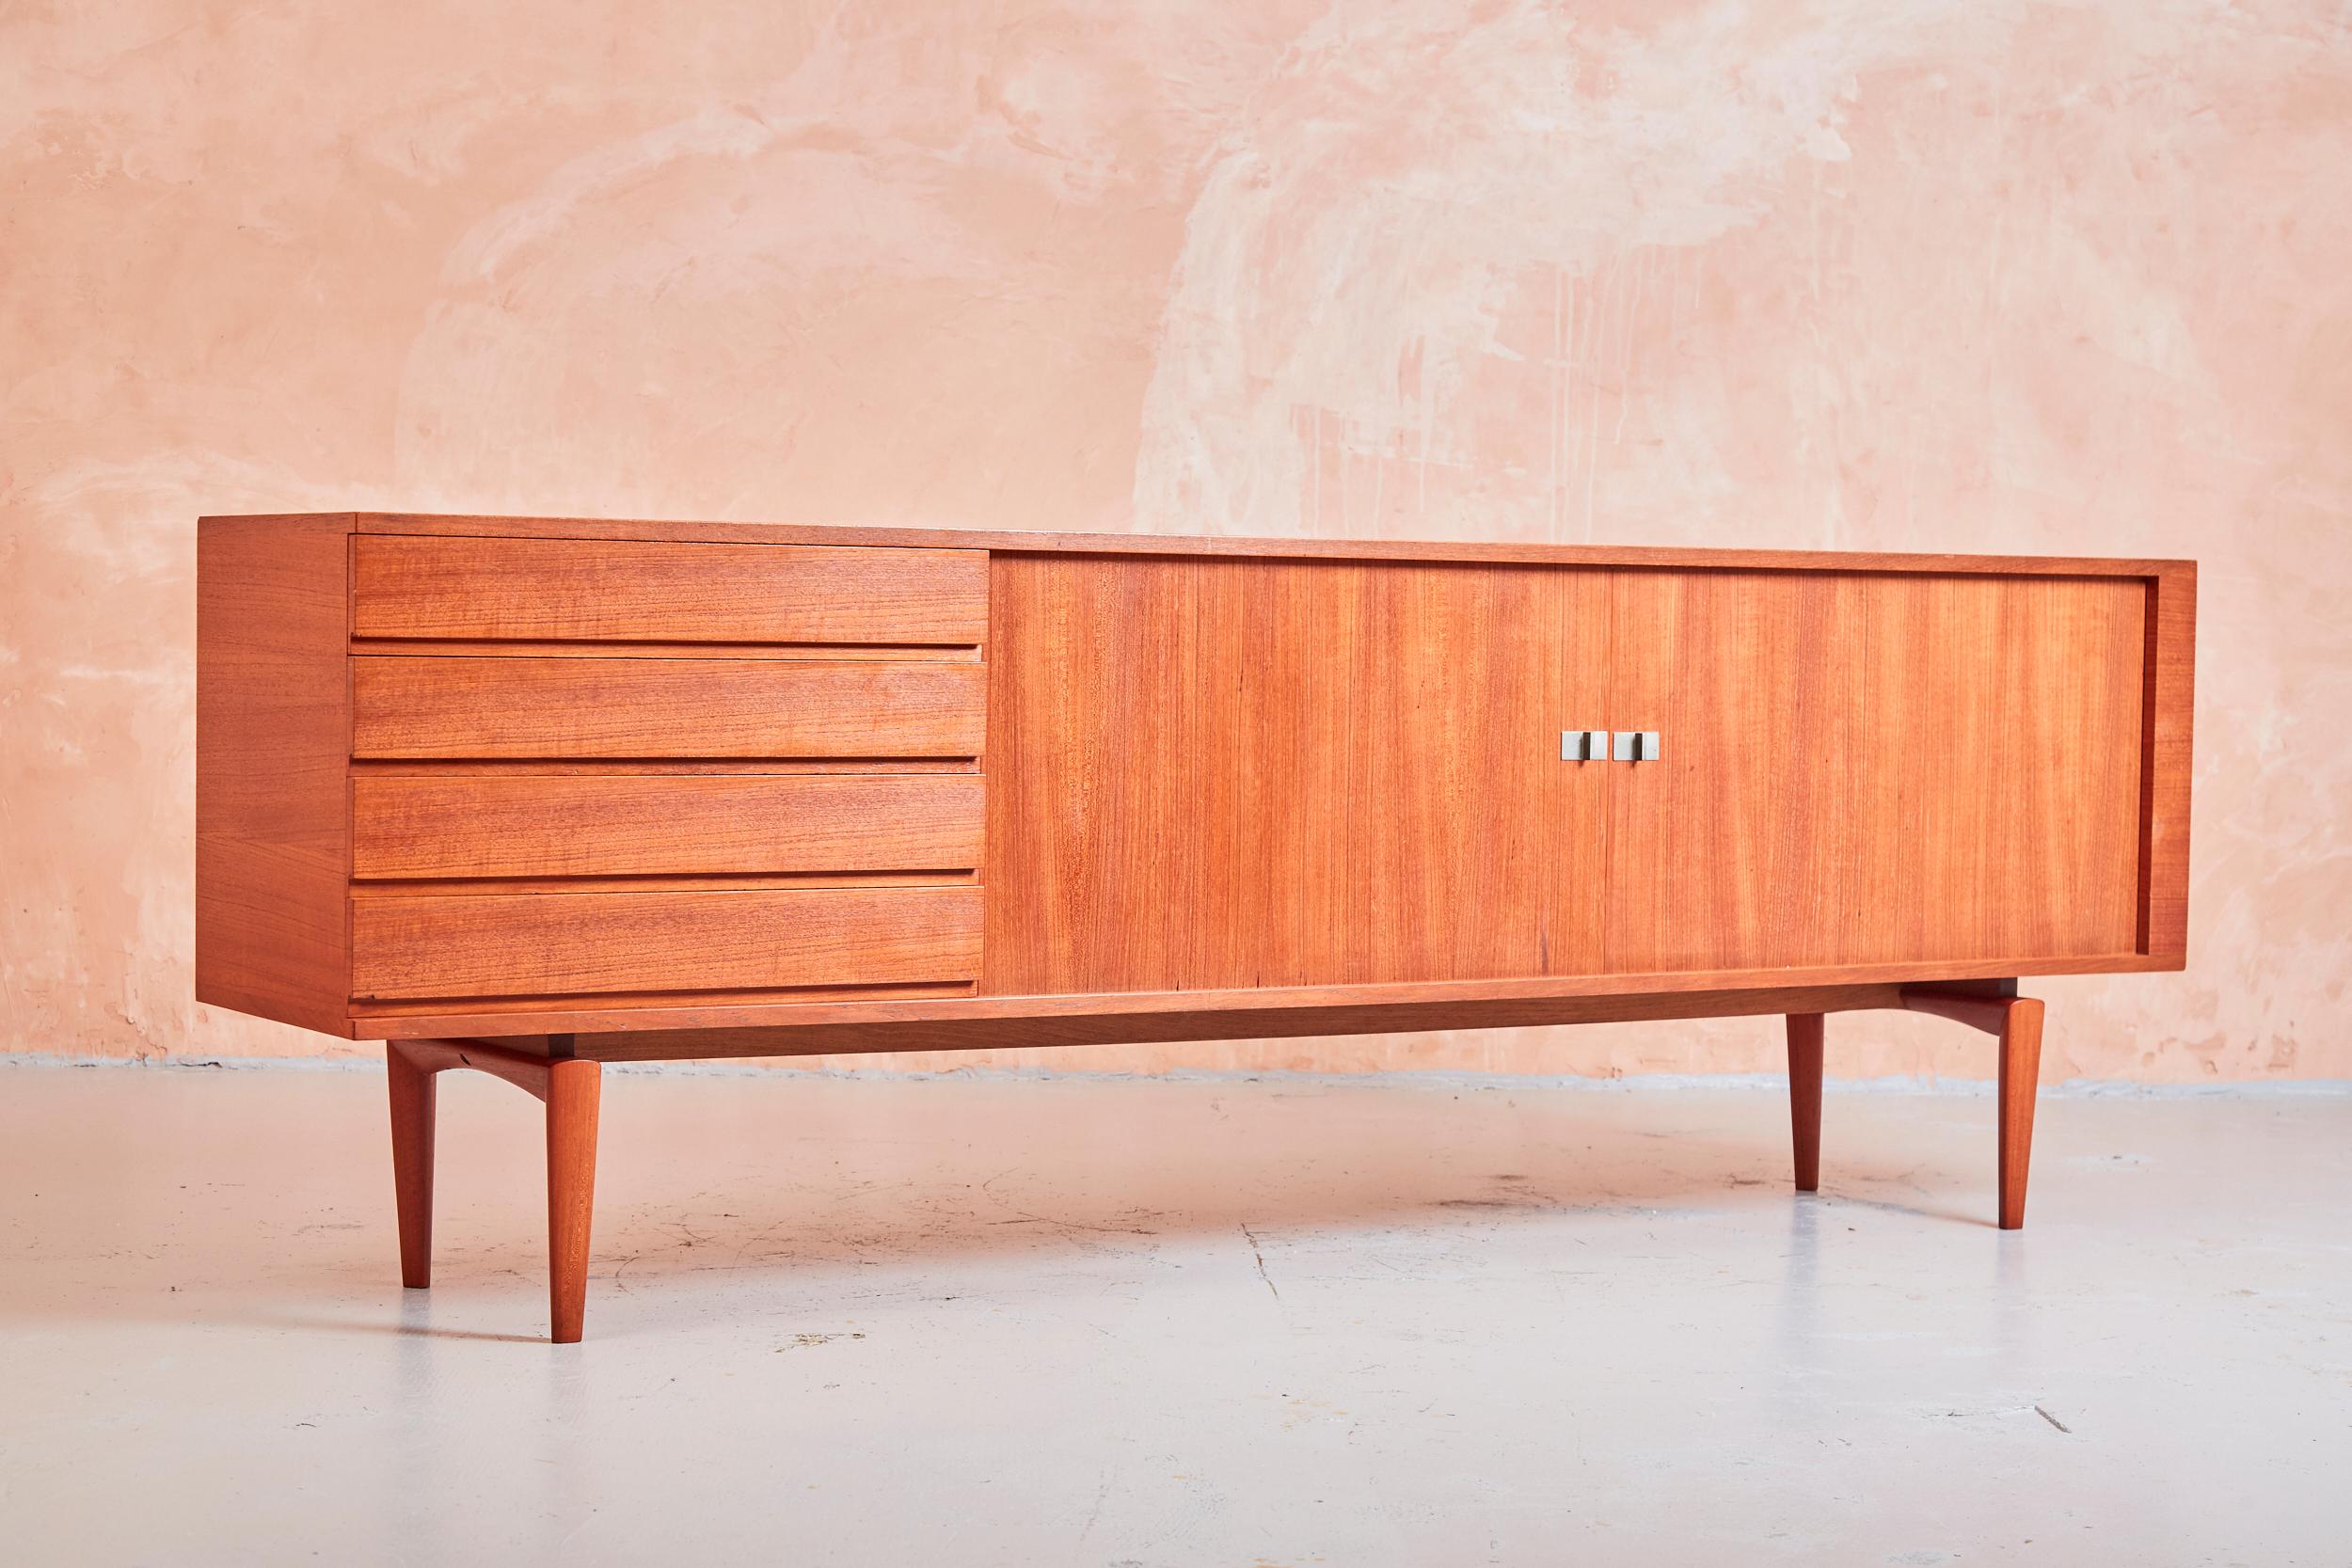 A sought after design classic, this sideboard was designed by Henry Walter Klein, and produced by Bramin in the 1960s.

With four drawers positioned next to two sliding tambour doors, the credenza shows exquisite craftsmanship and balanced